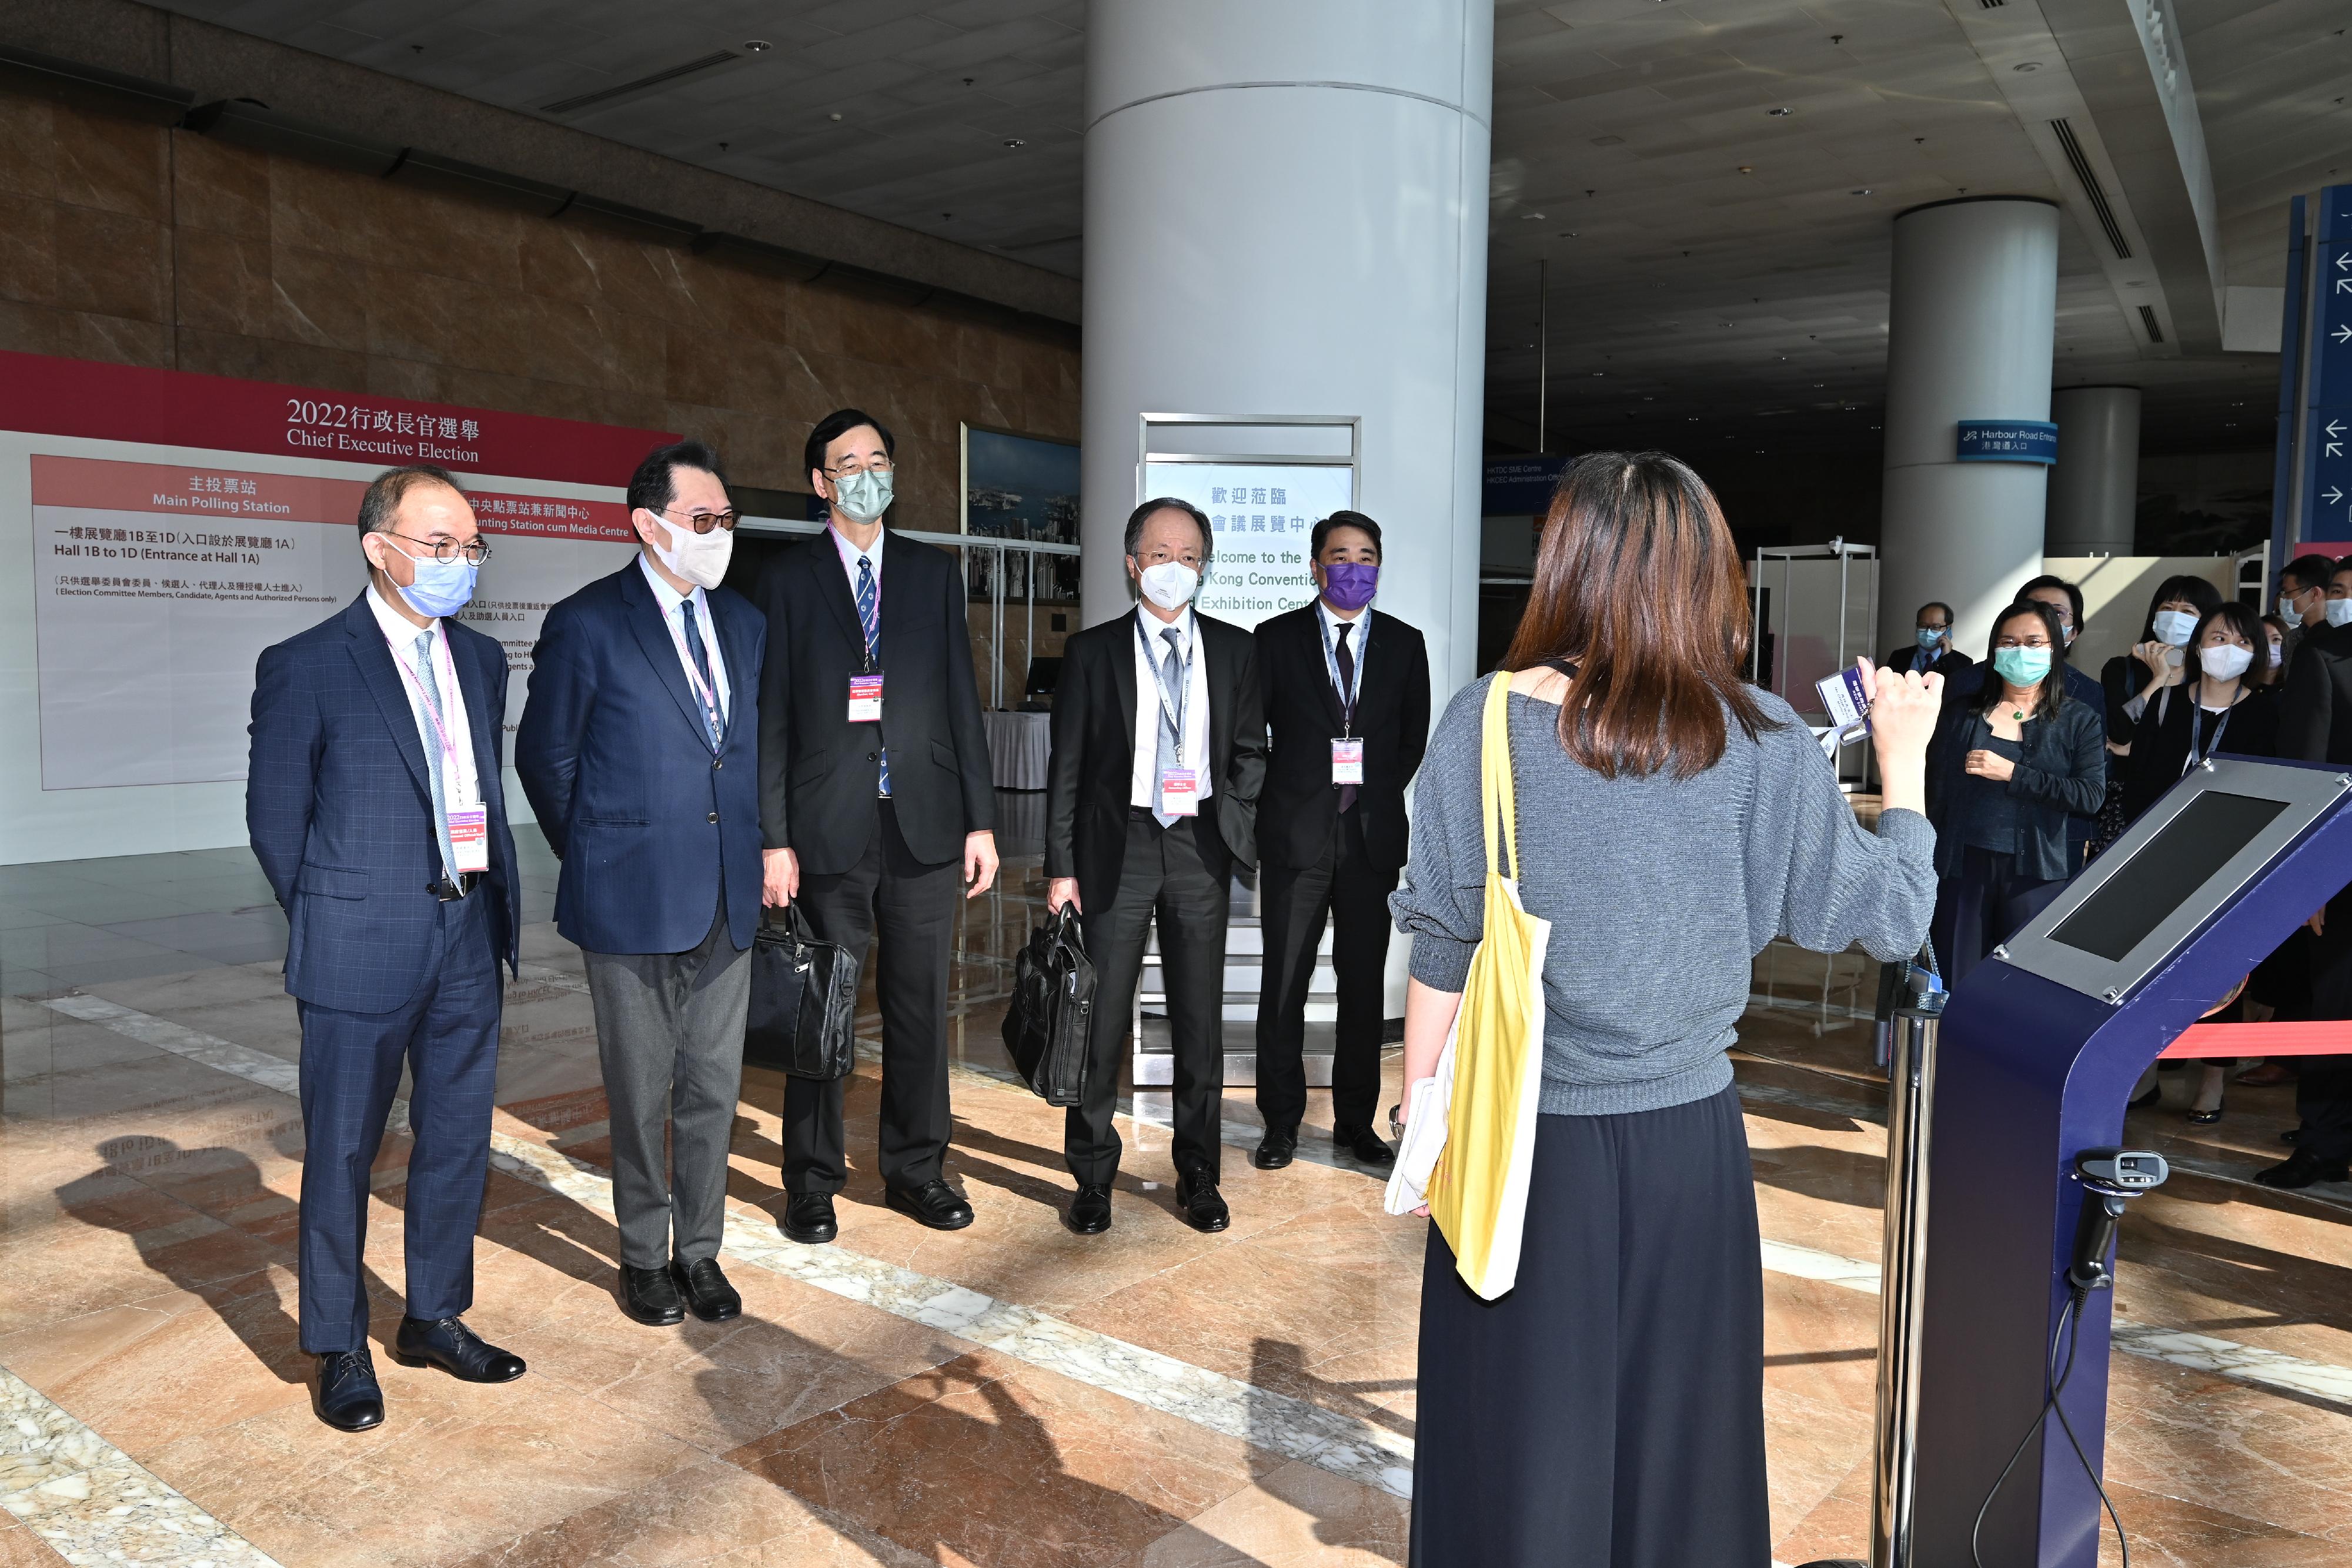 The Chairman of the Electoral Affairs Commission (EAC), Mr Justice Barnabas Fung Wah (second left), the Secretary for Constitutional and Mainland Affairs, Mr Erick Tsang Kwok-wai (first left), EAC member Professor Daniel Shek (third left), and the Returning Officer, Mr Justice Keith Yeung Kar-hung (fourth left), were briefed by staff of the Registration and Electoral Office during their visit to the main polling station and central counting station cum media centre of the 2022 Chief Executive Election at the Hong Kong Convention and Exhibition Centre in Wan Chai today (May 4).